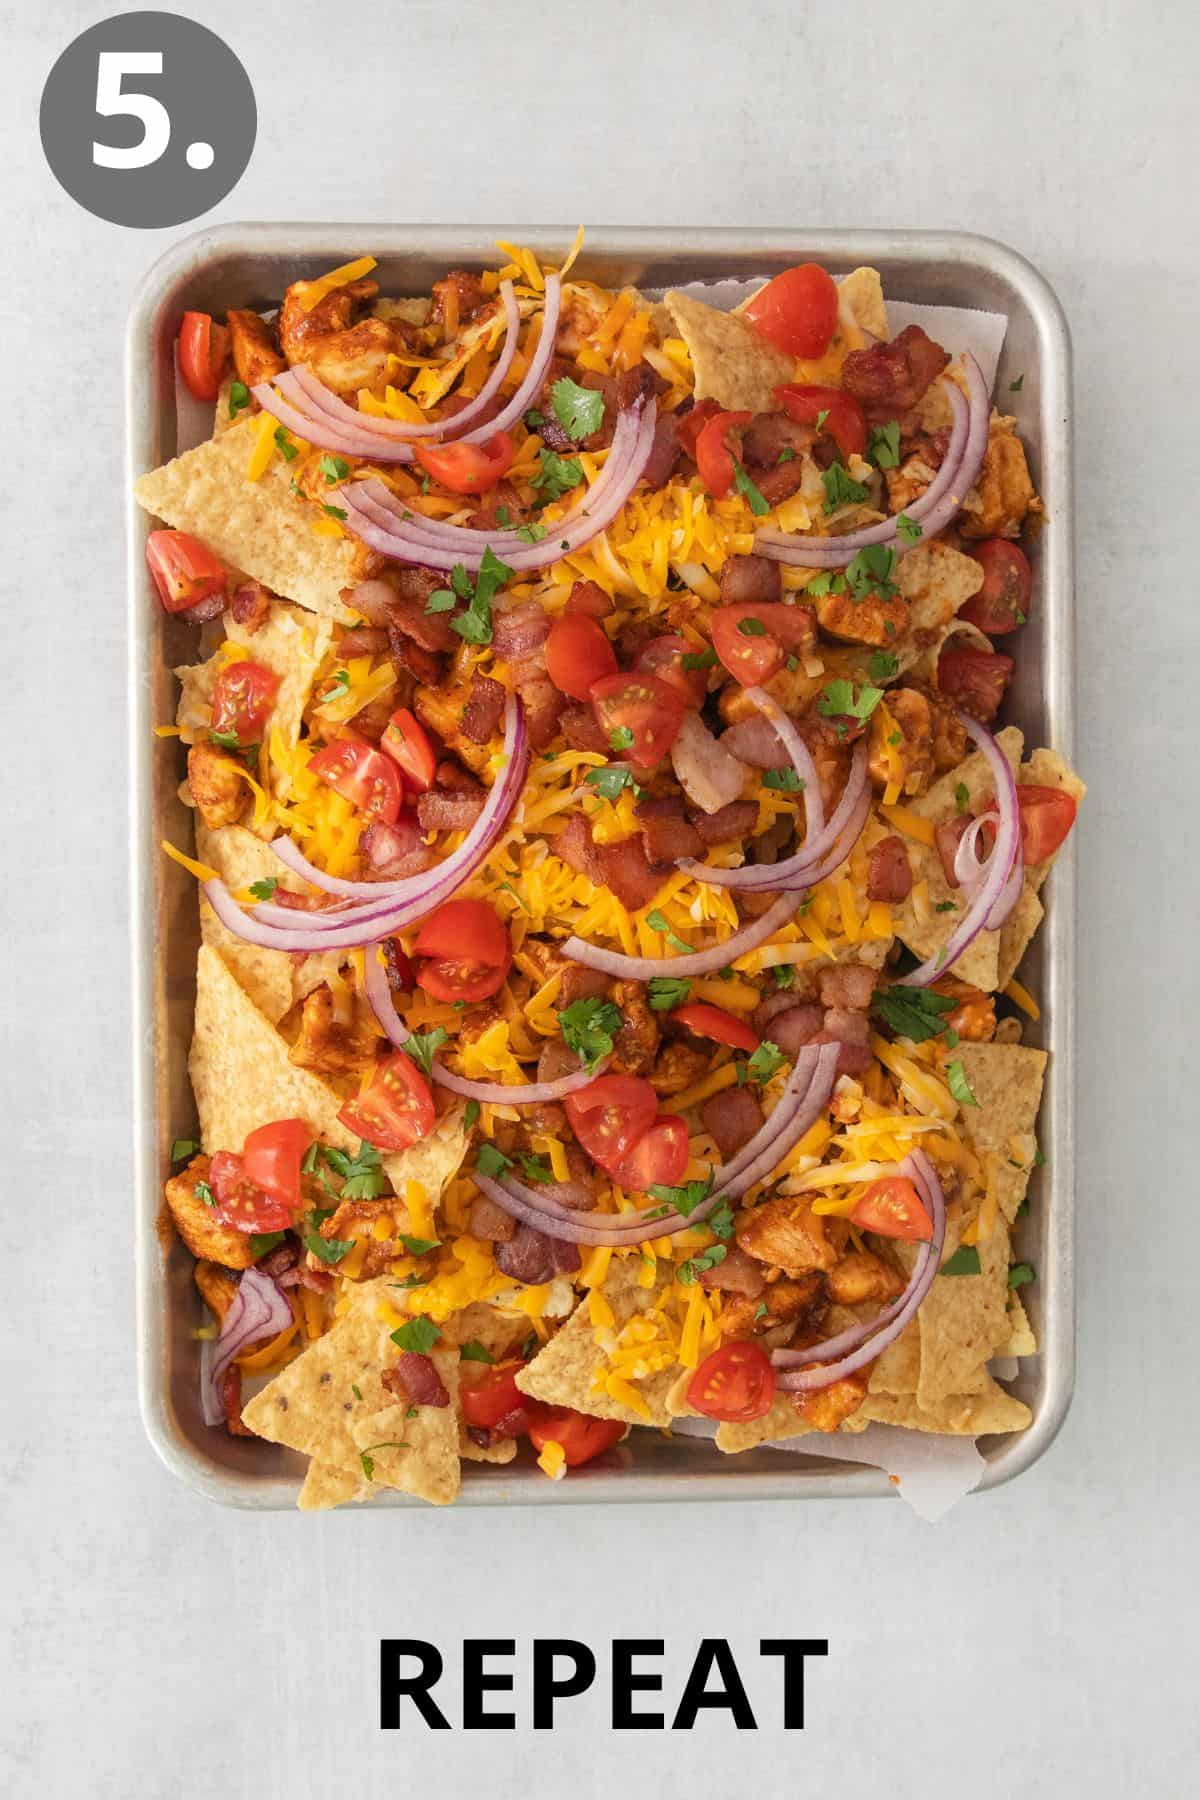 Additional layers of nacho ingredients layered on a sheet pan